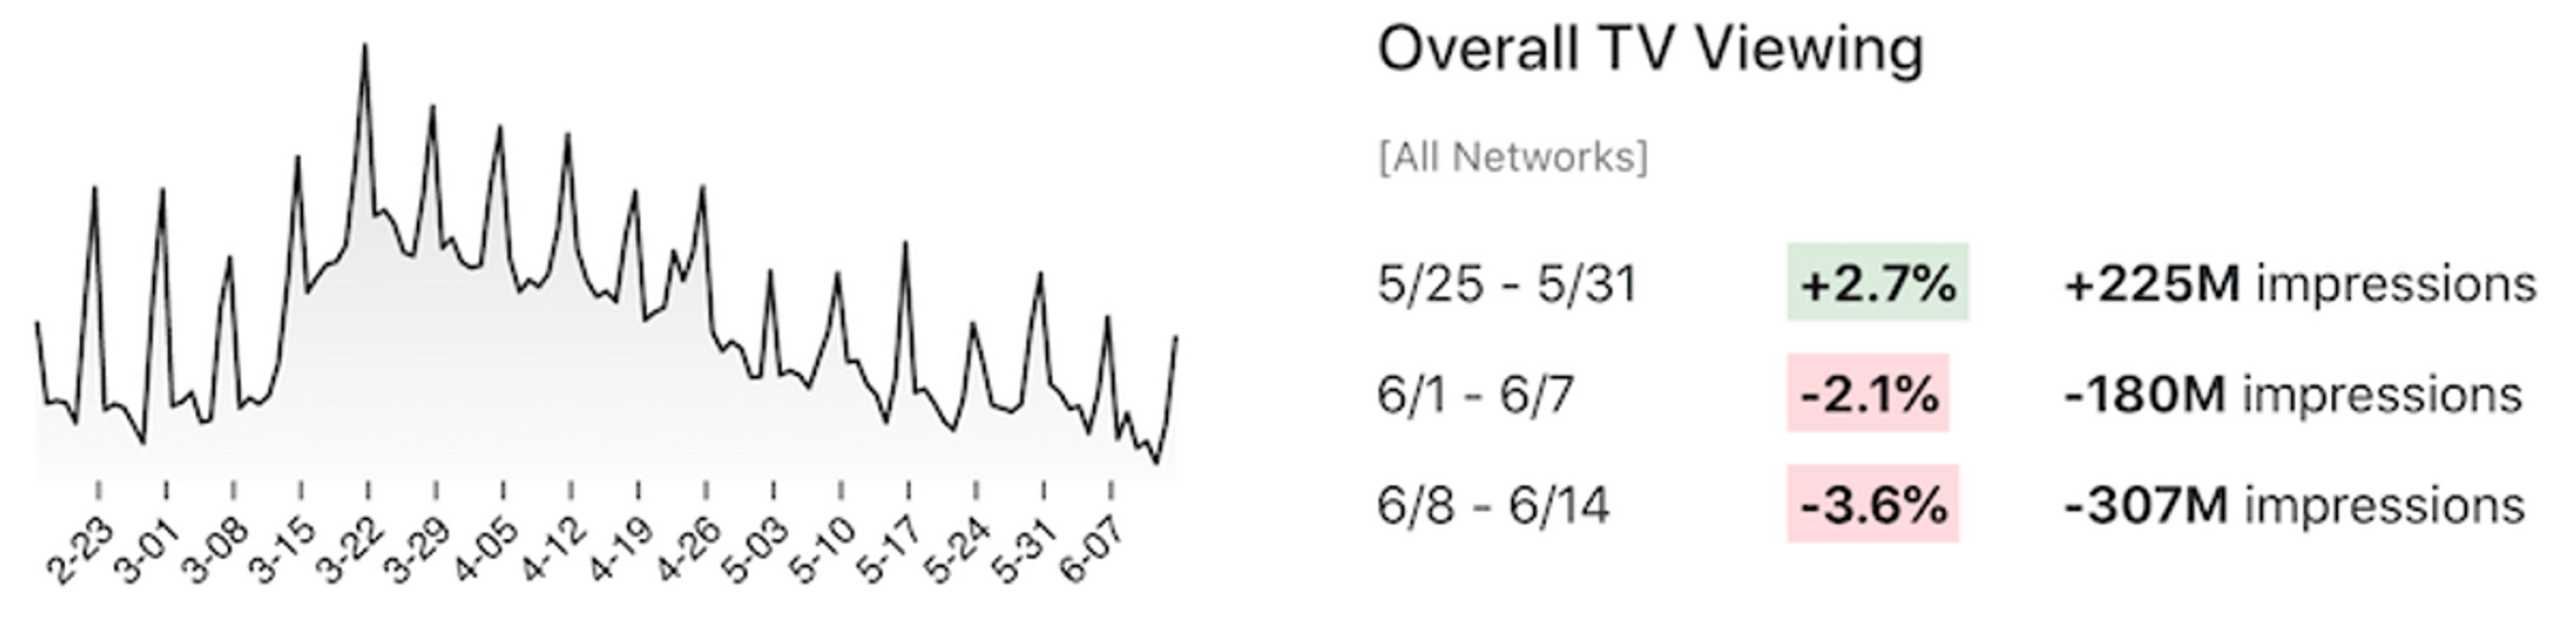 Line chart overall TV viewing trend week-over-week.